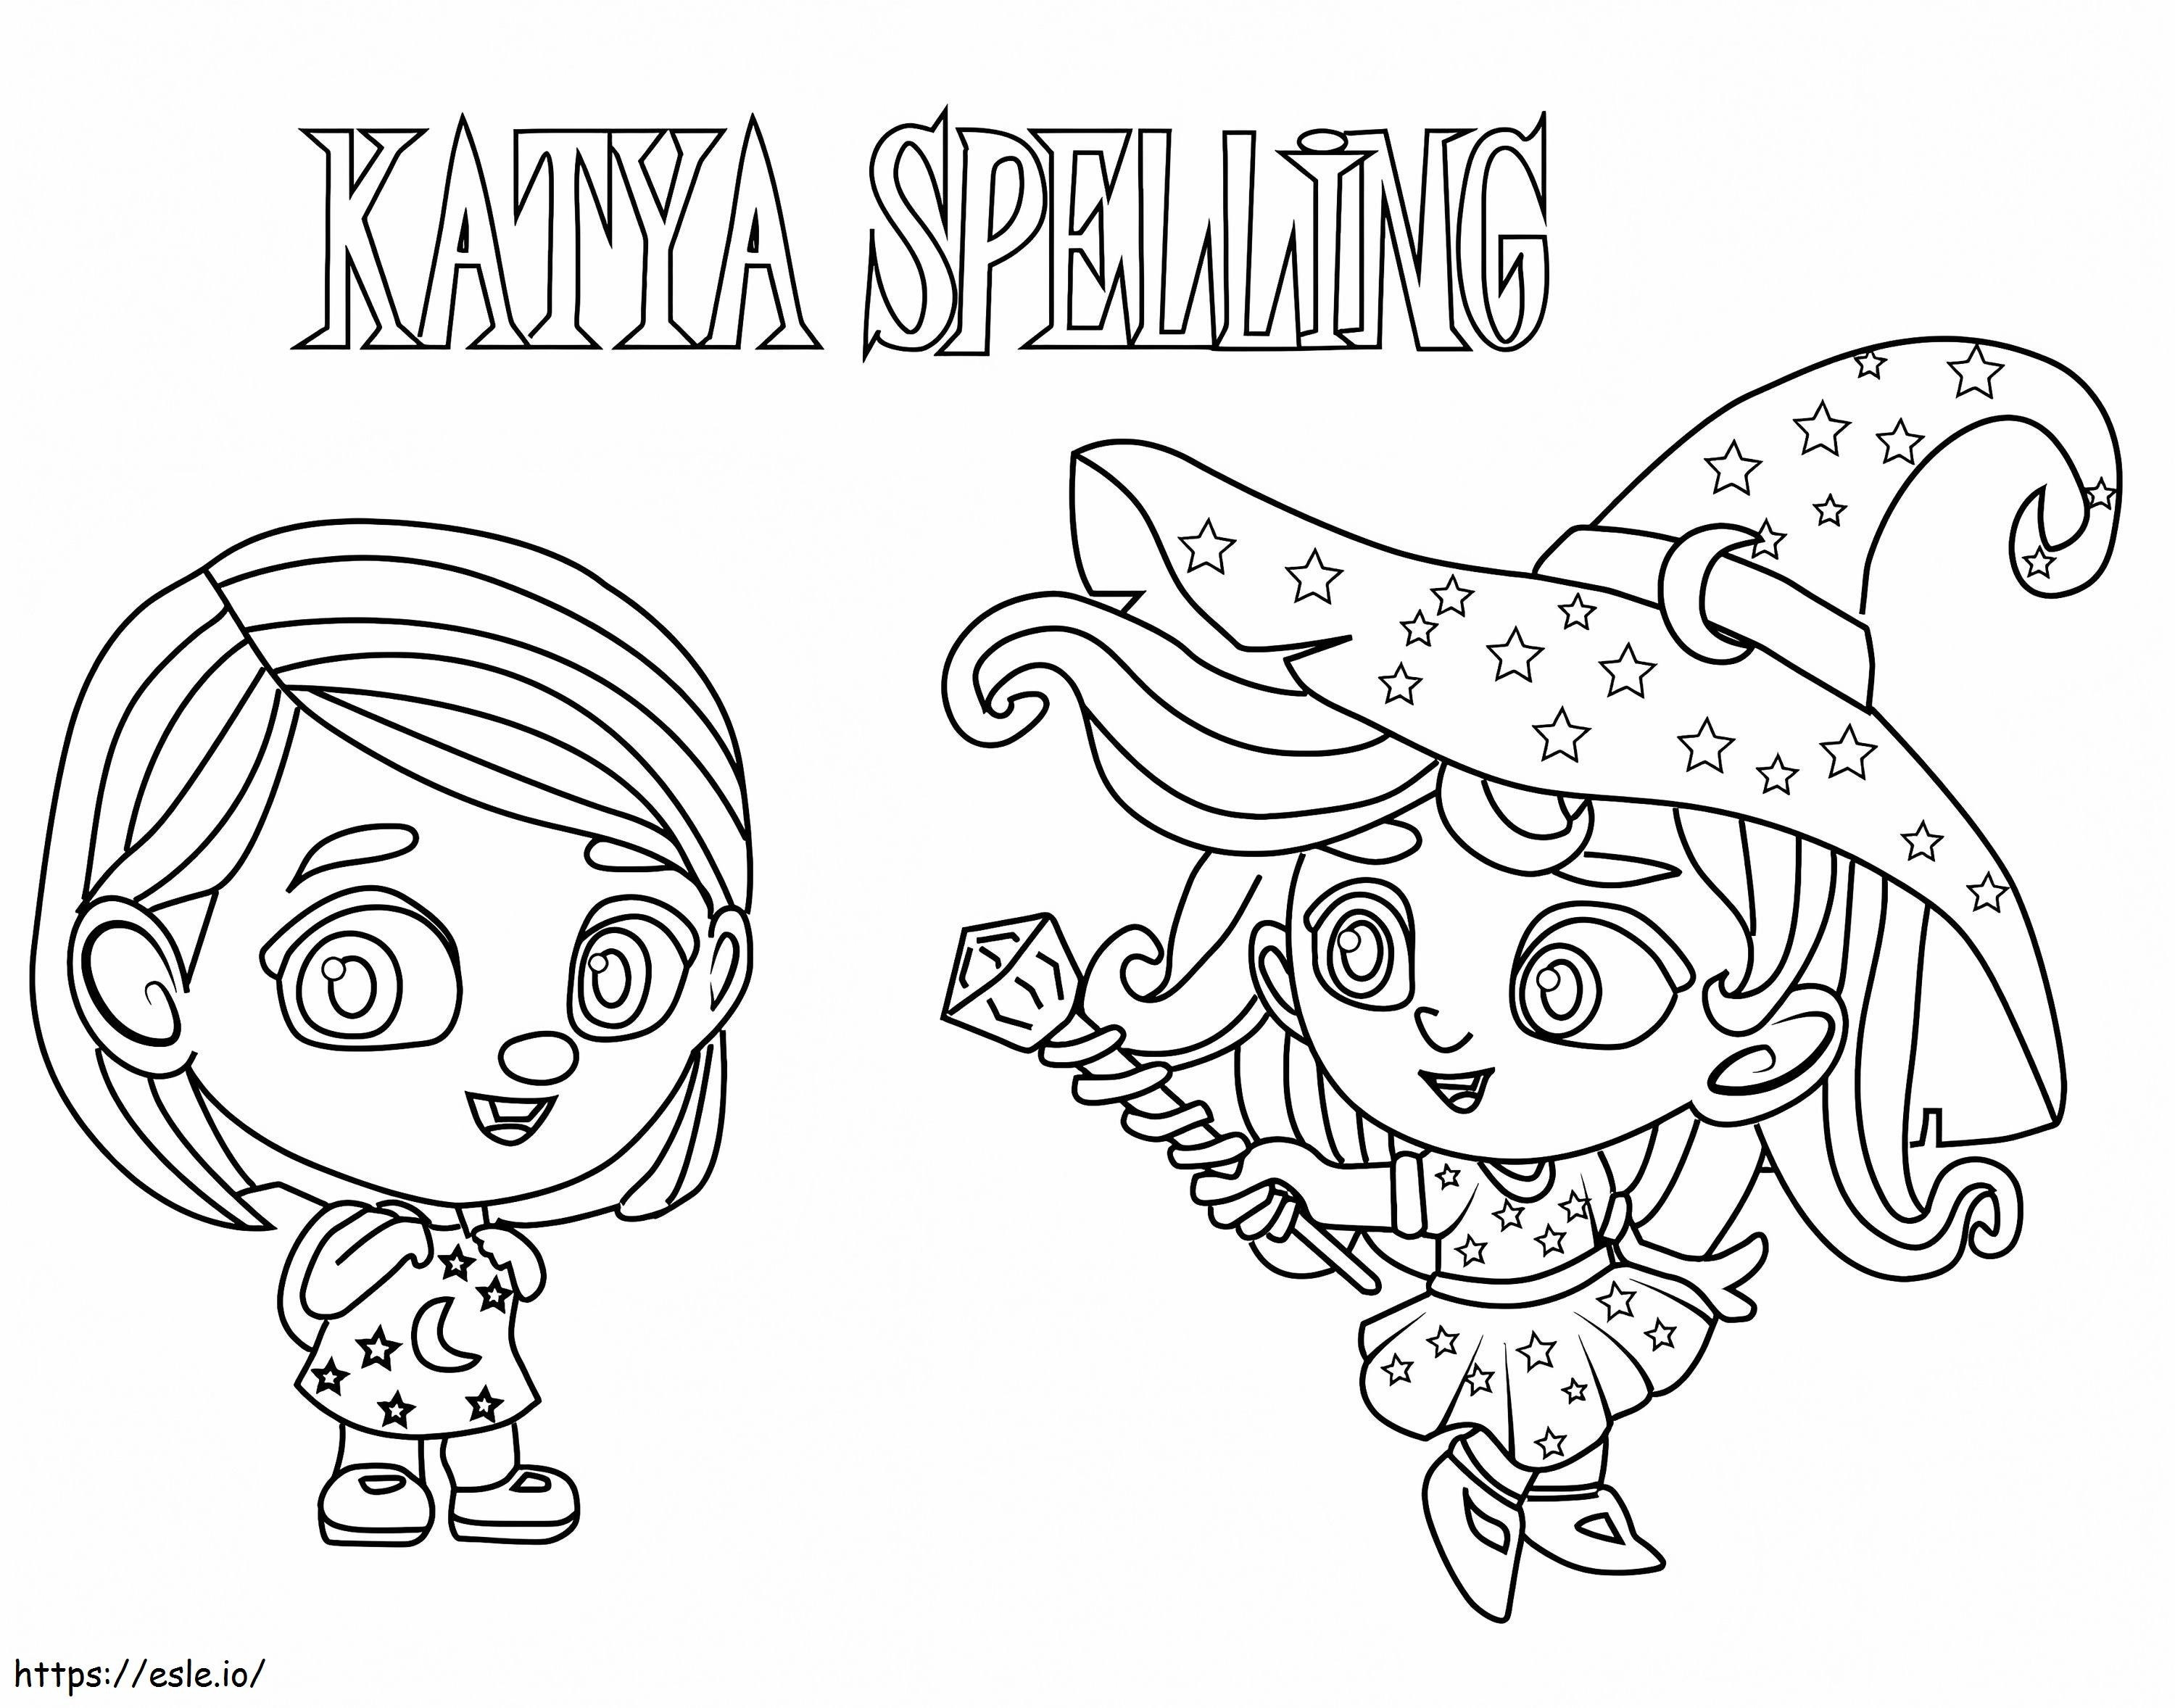 Katya Spelling From Super Monsters coloring page